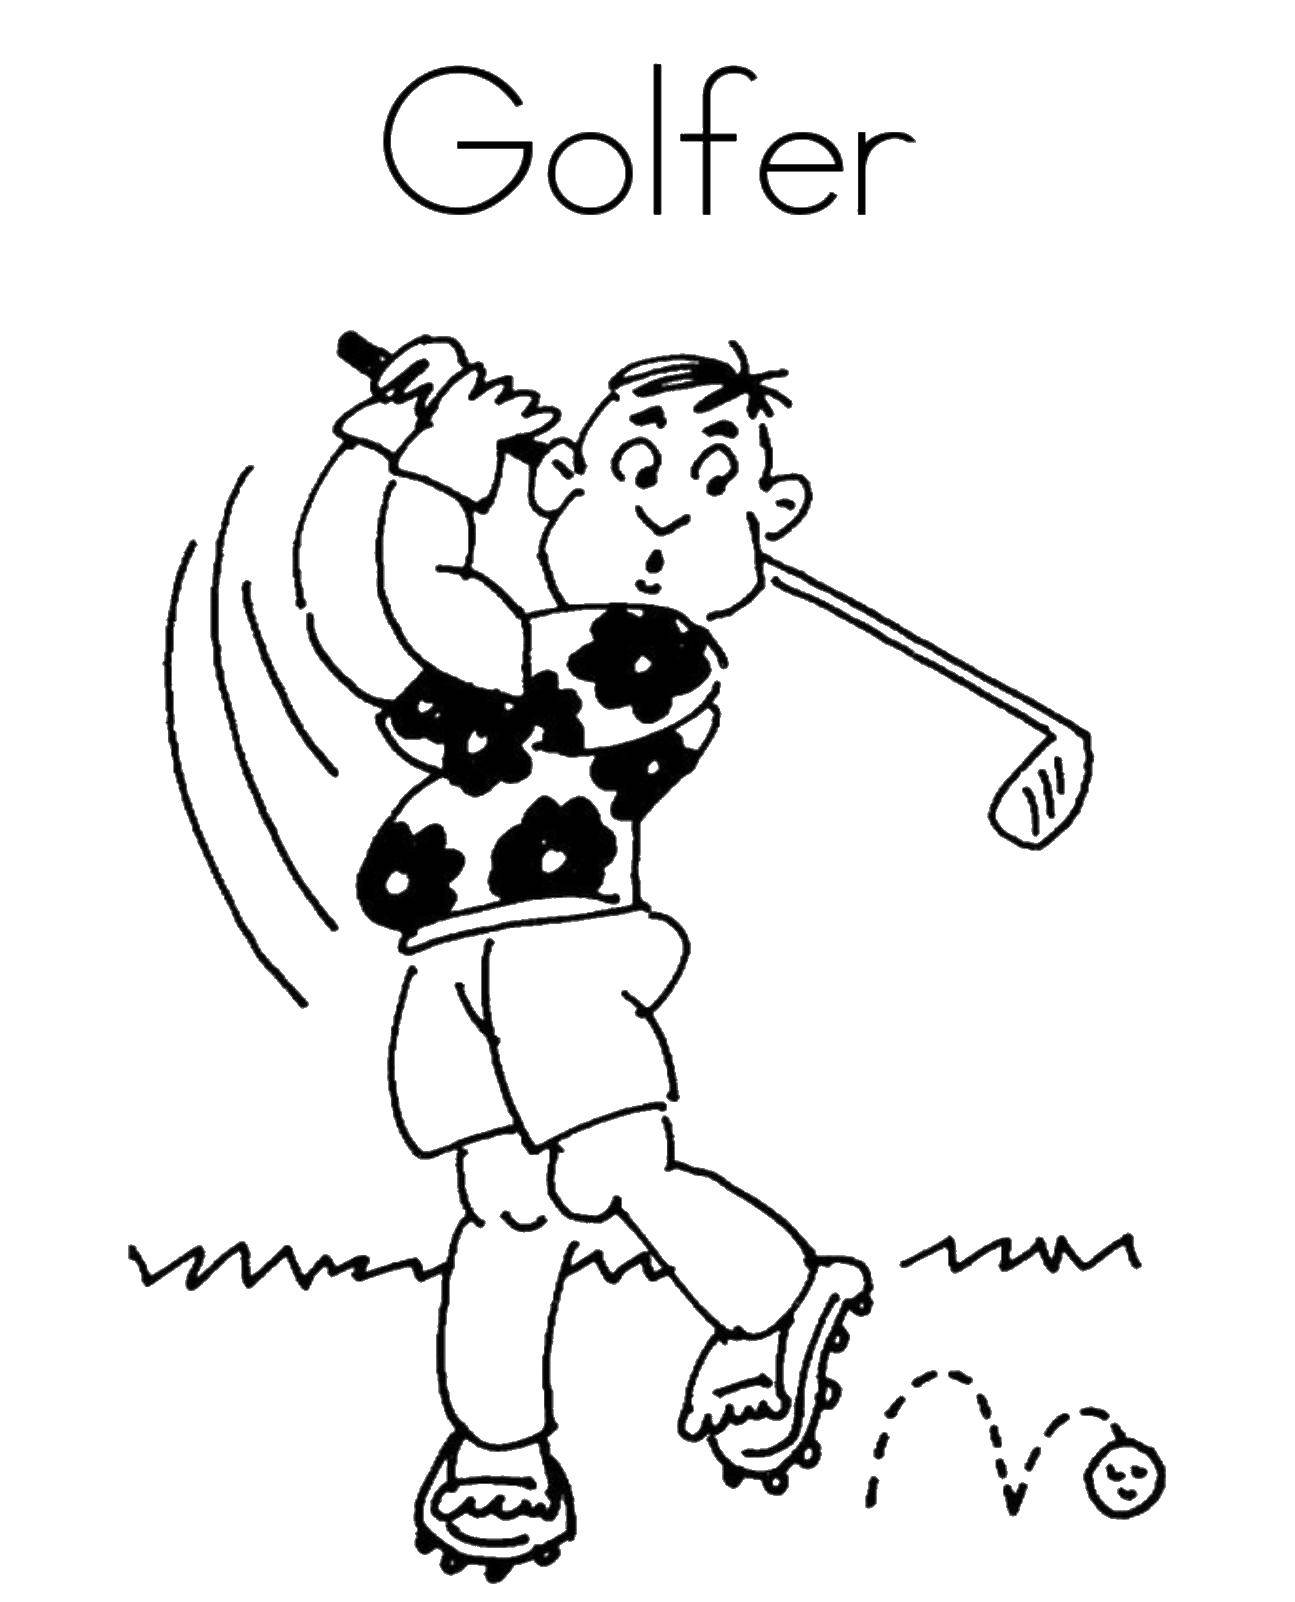 Coloring Golfer. Category Sports. Tags:  sports, Golf, golfer.